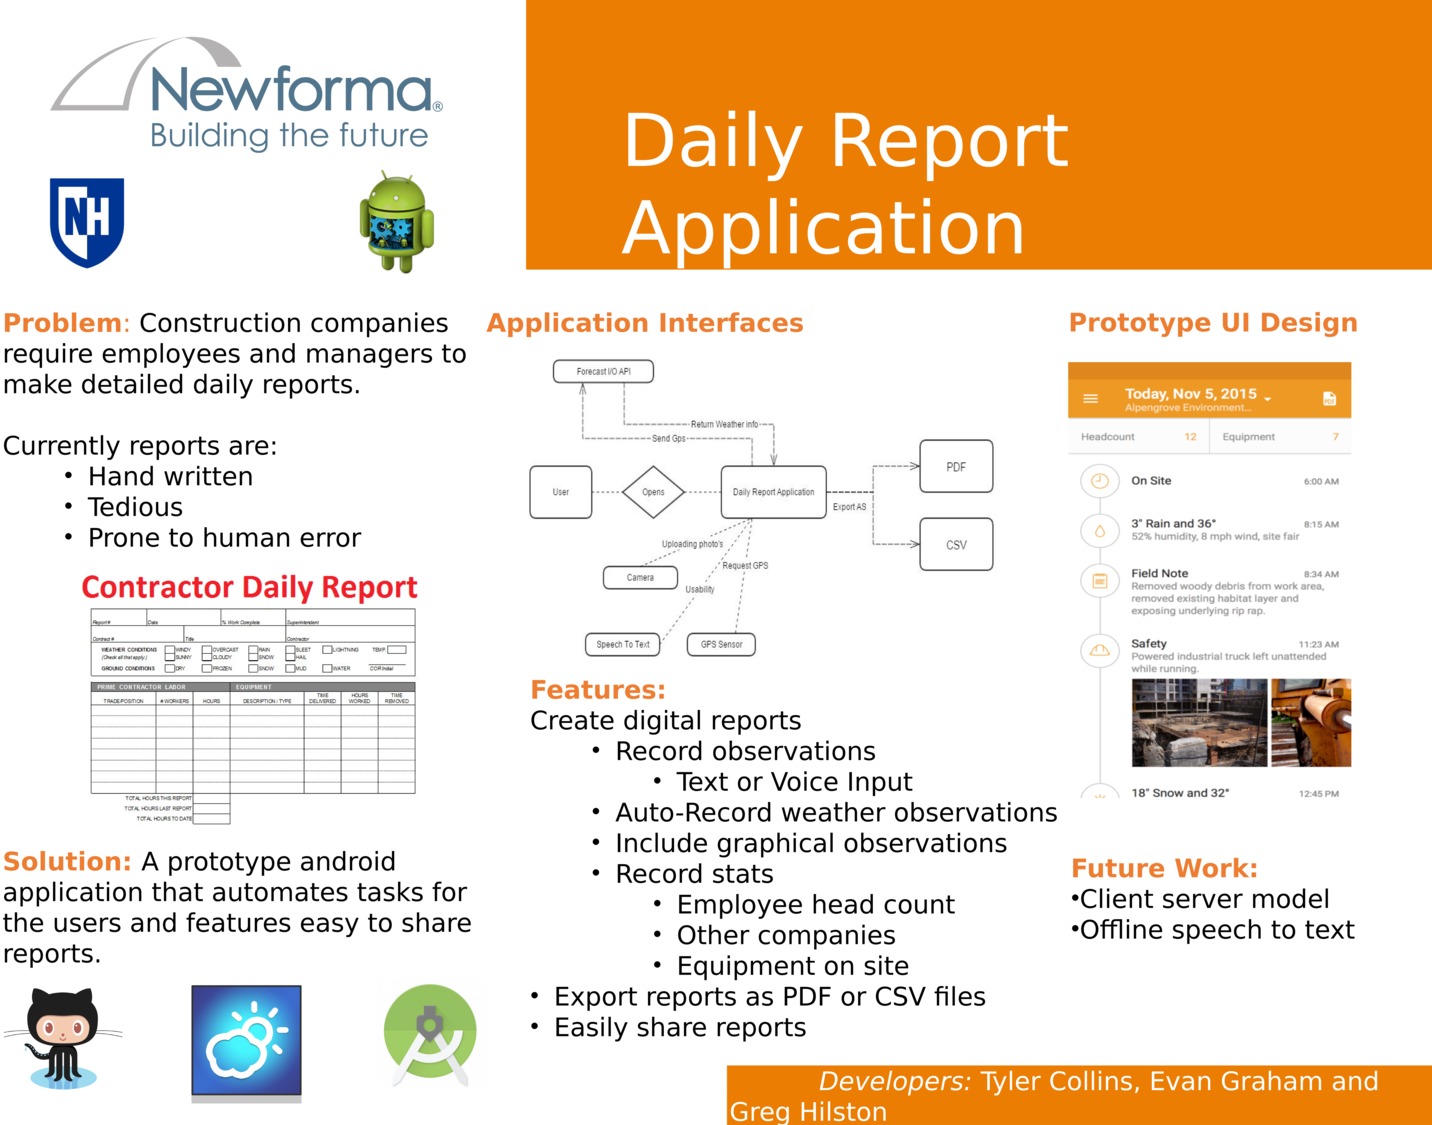 Newsroom Daily Report by ejo78